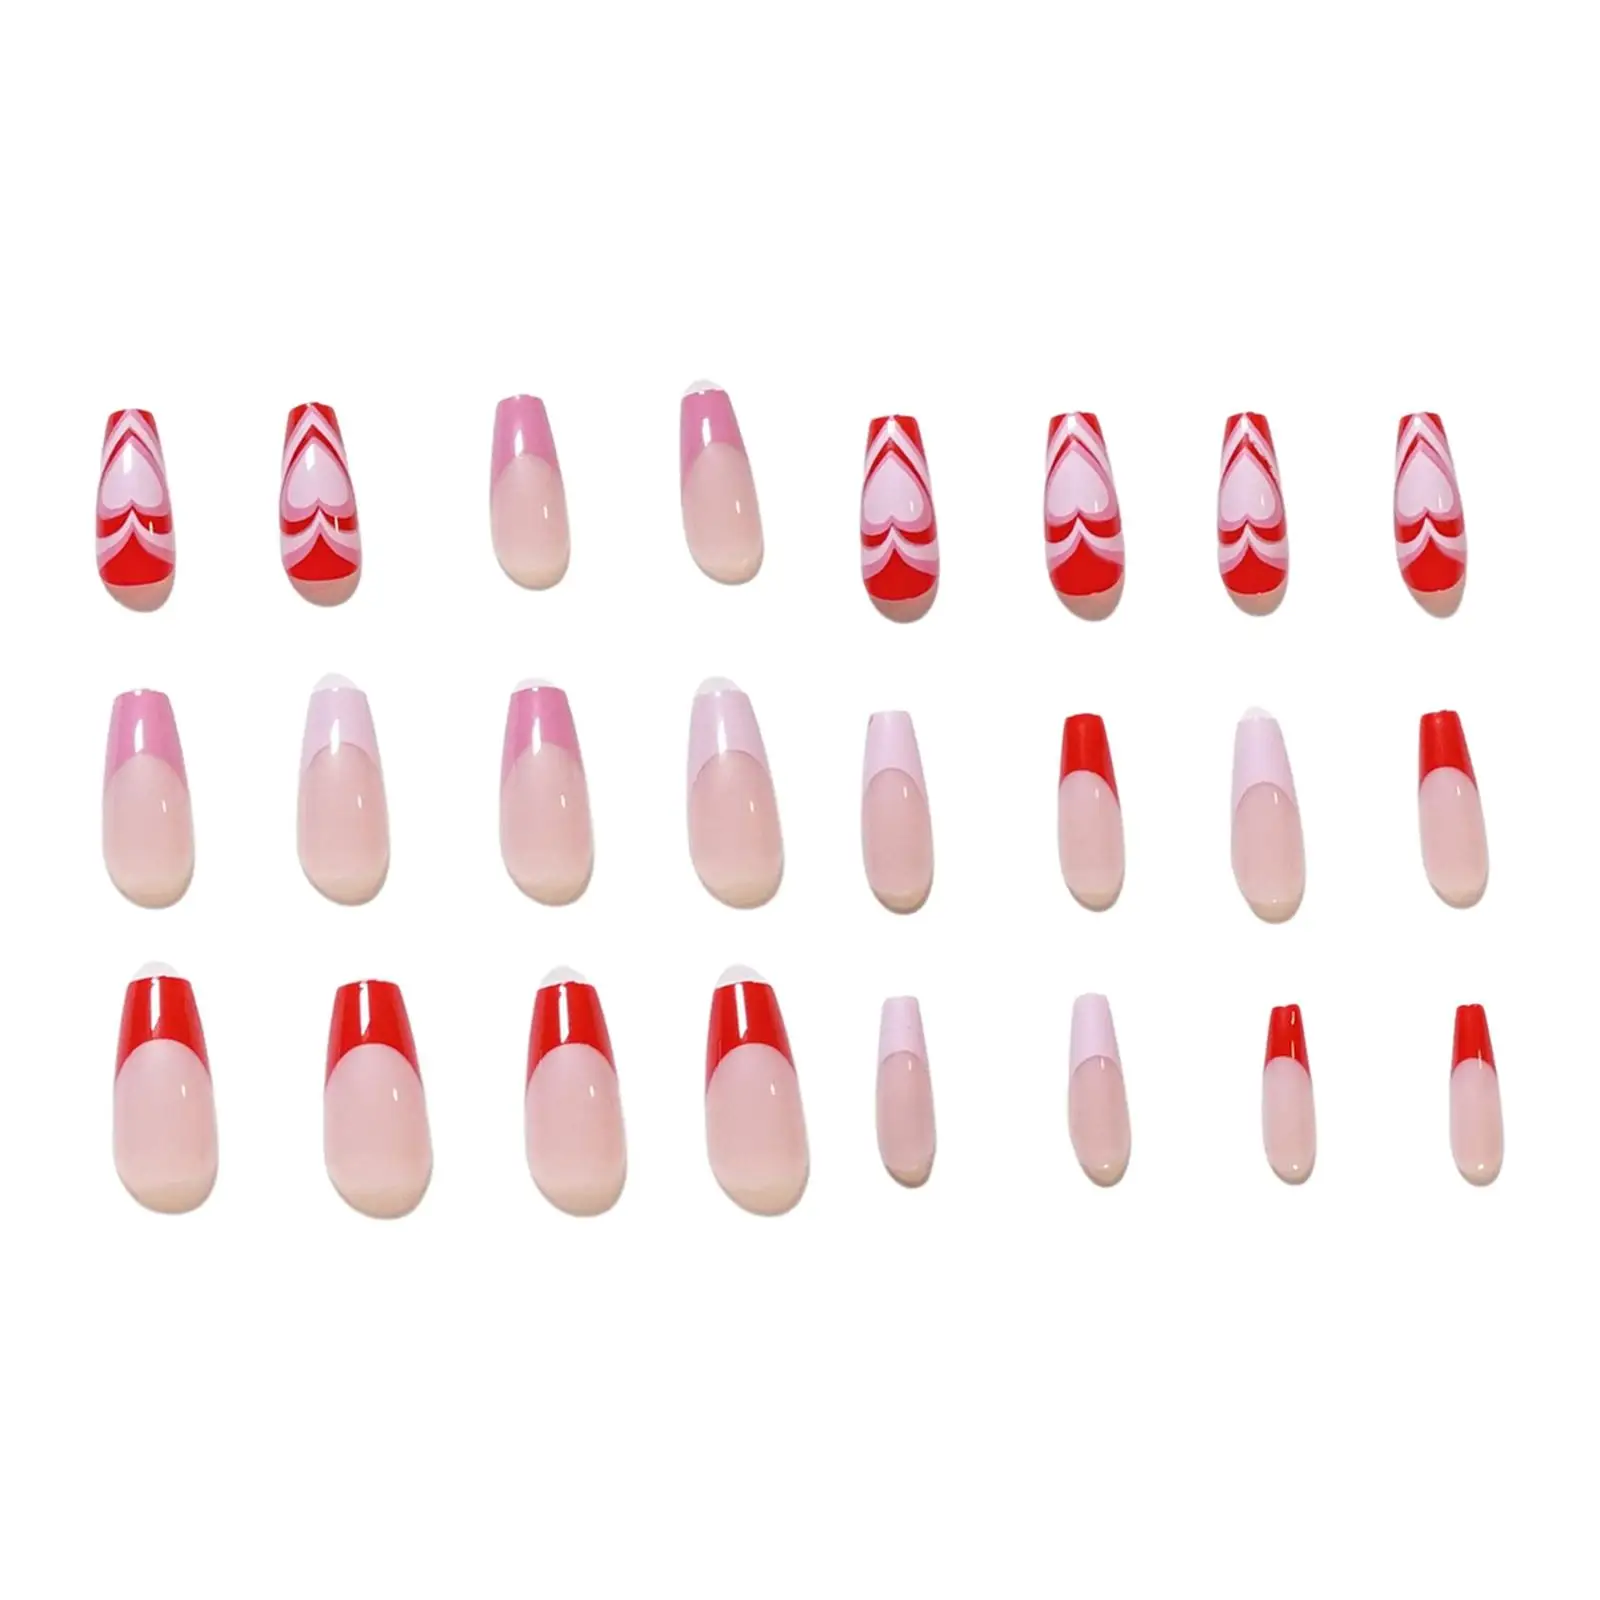 24x Press on Nails for Nail Extension Lightweight Reusable French Peach Heart Fashion for Nail Salons Practice DIY Nail Art Home